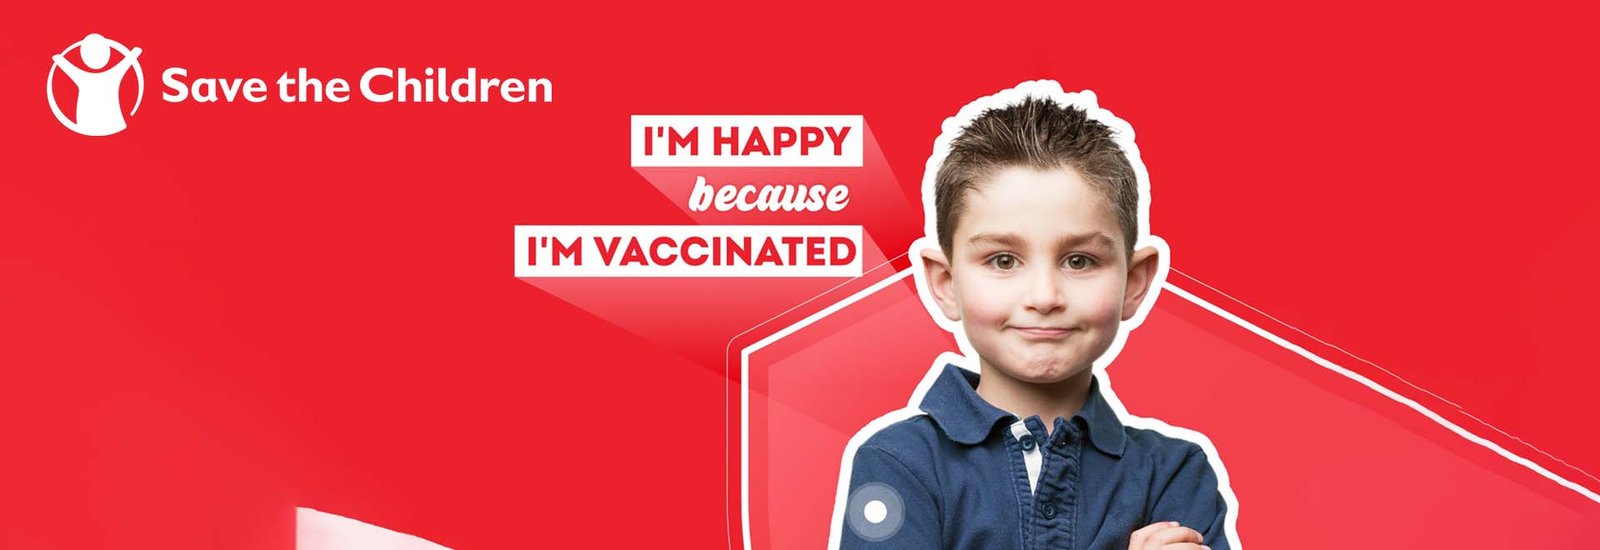 a 7 year old child in blue shirt with red background. "im happy because im vaccinated" written on left.